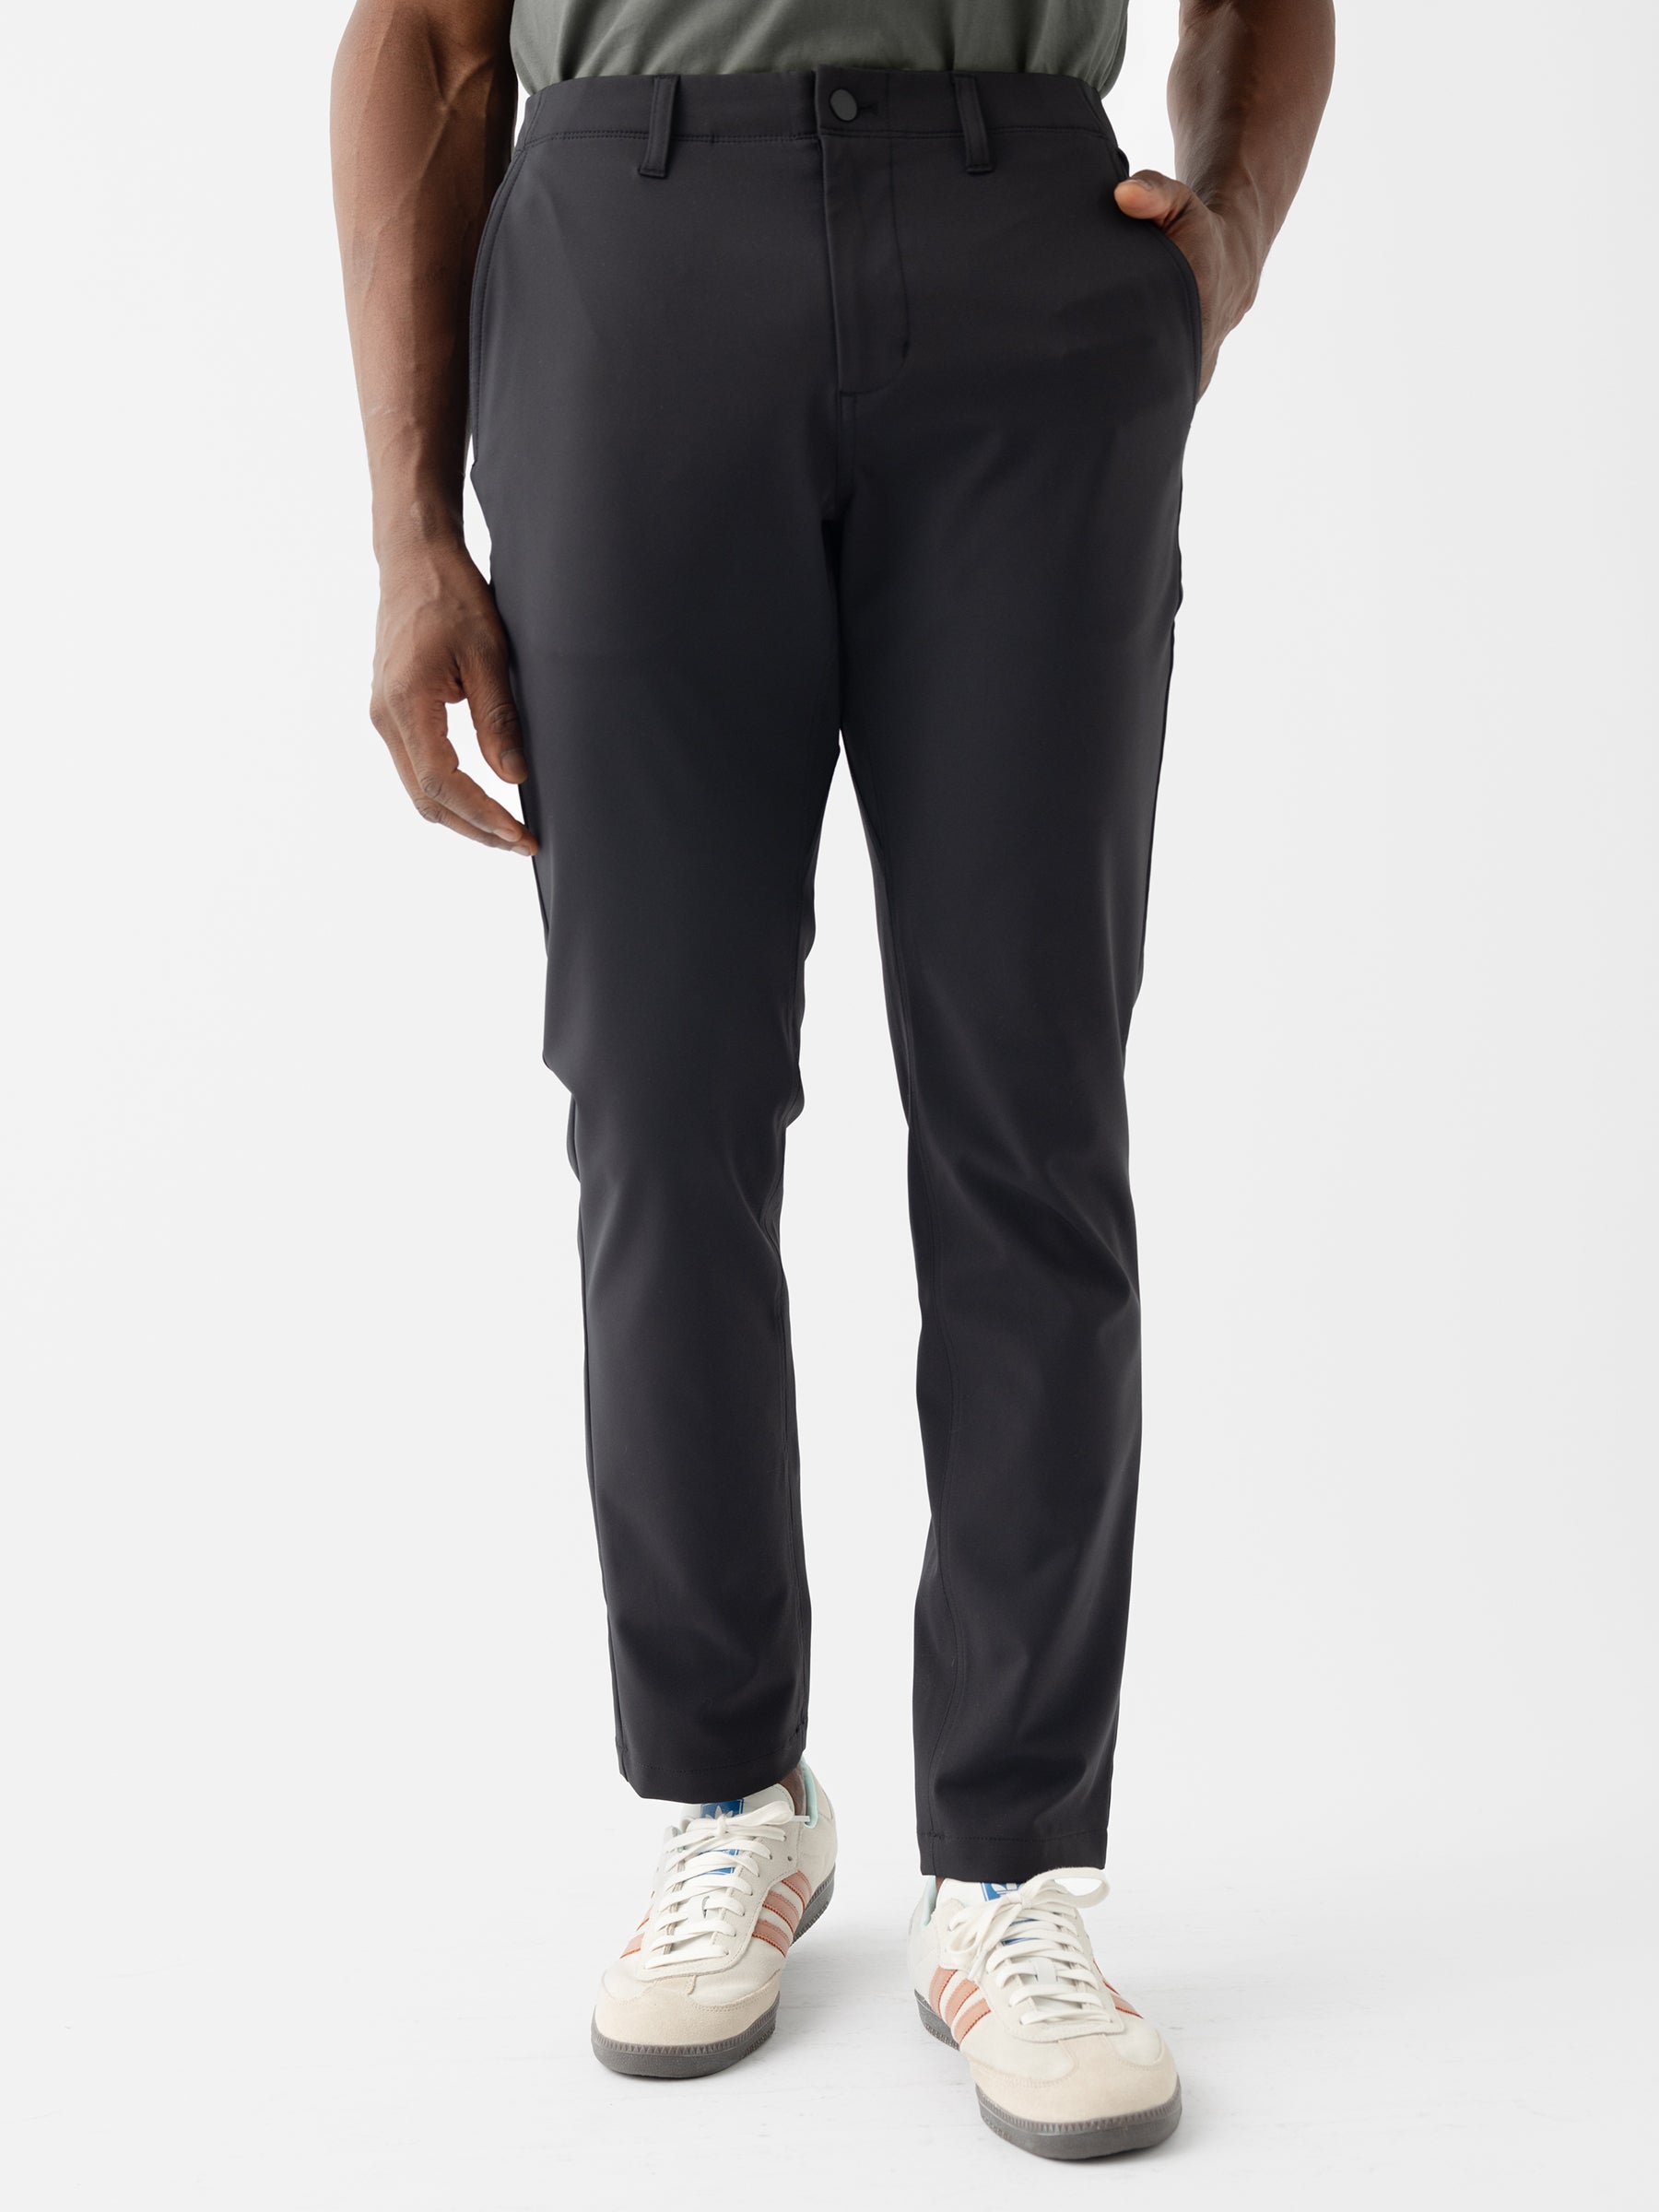 A person is standing against a white background with their right hand in their pocket. They are wearing Cozy Earth's Men's Everywhere Pant 30L in a dark color, a grey shirt, and white sneakers with pastel-colored accents. The pants have a classic fit with a waistband and front zipper. |Color:Jet Black